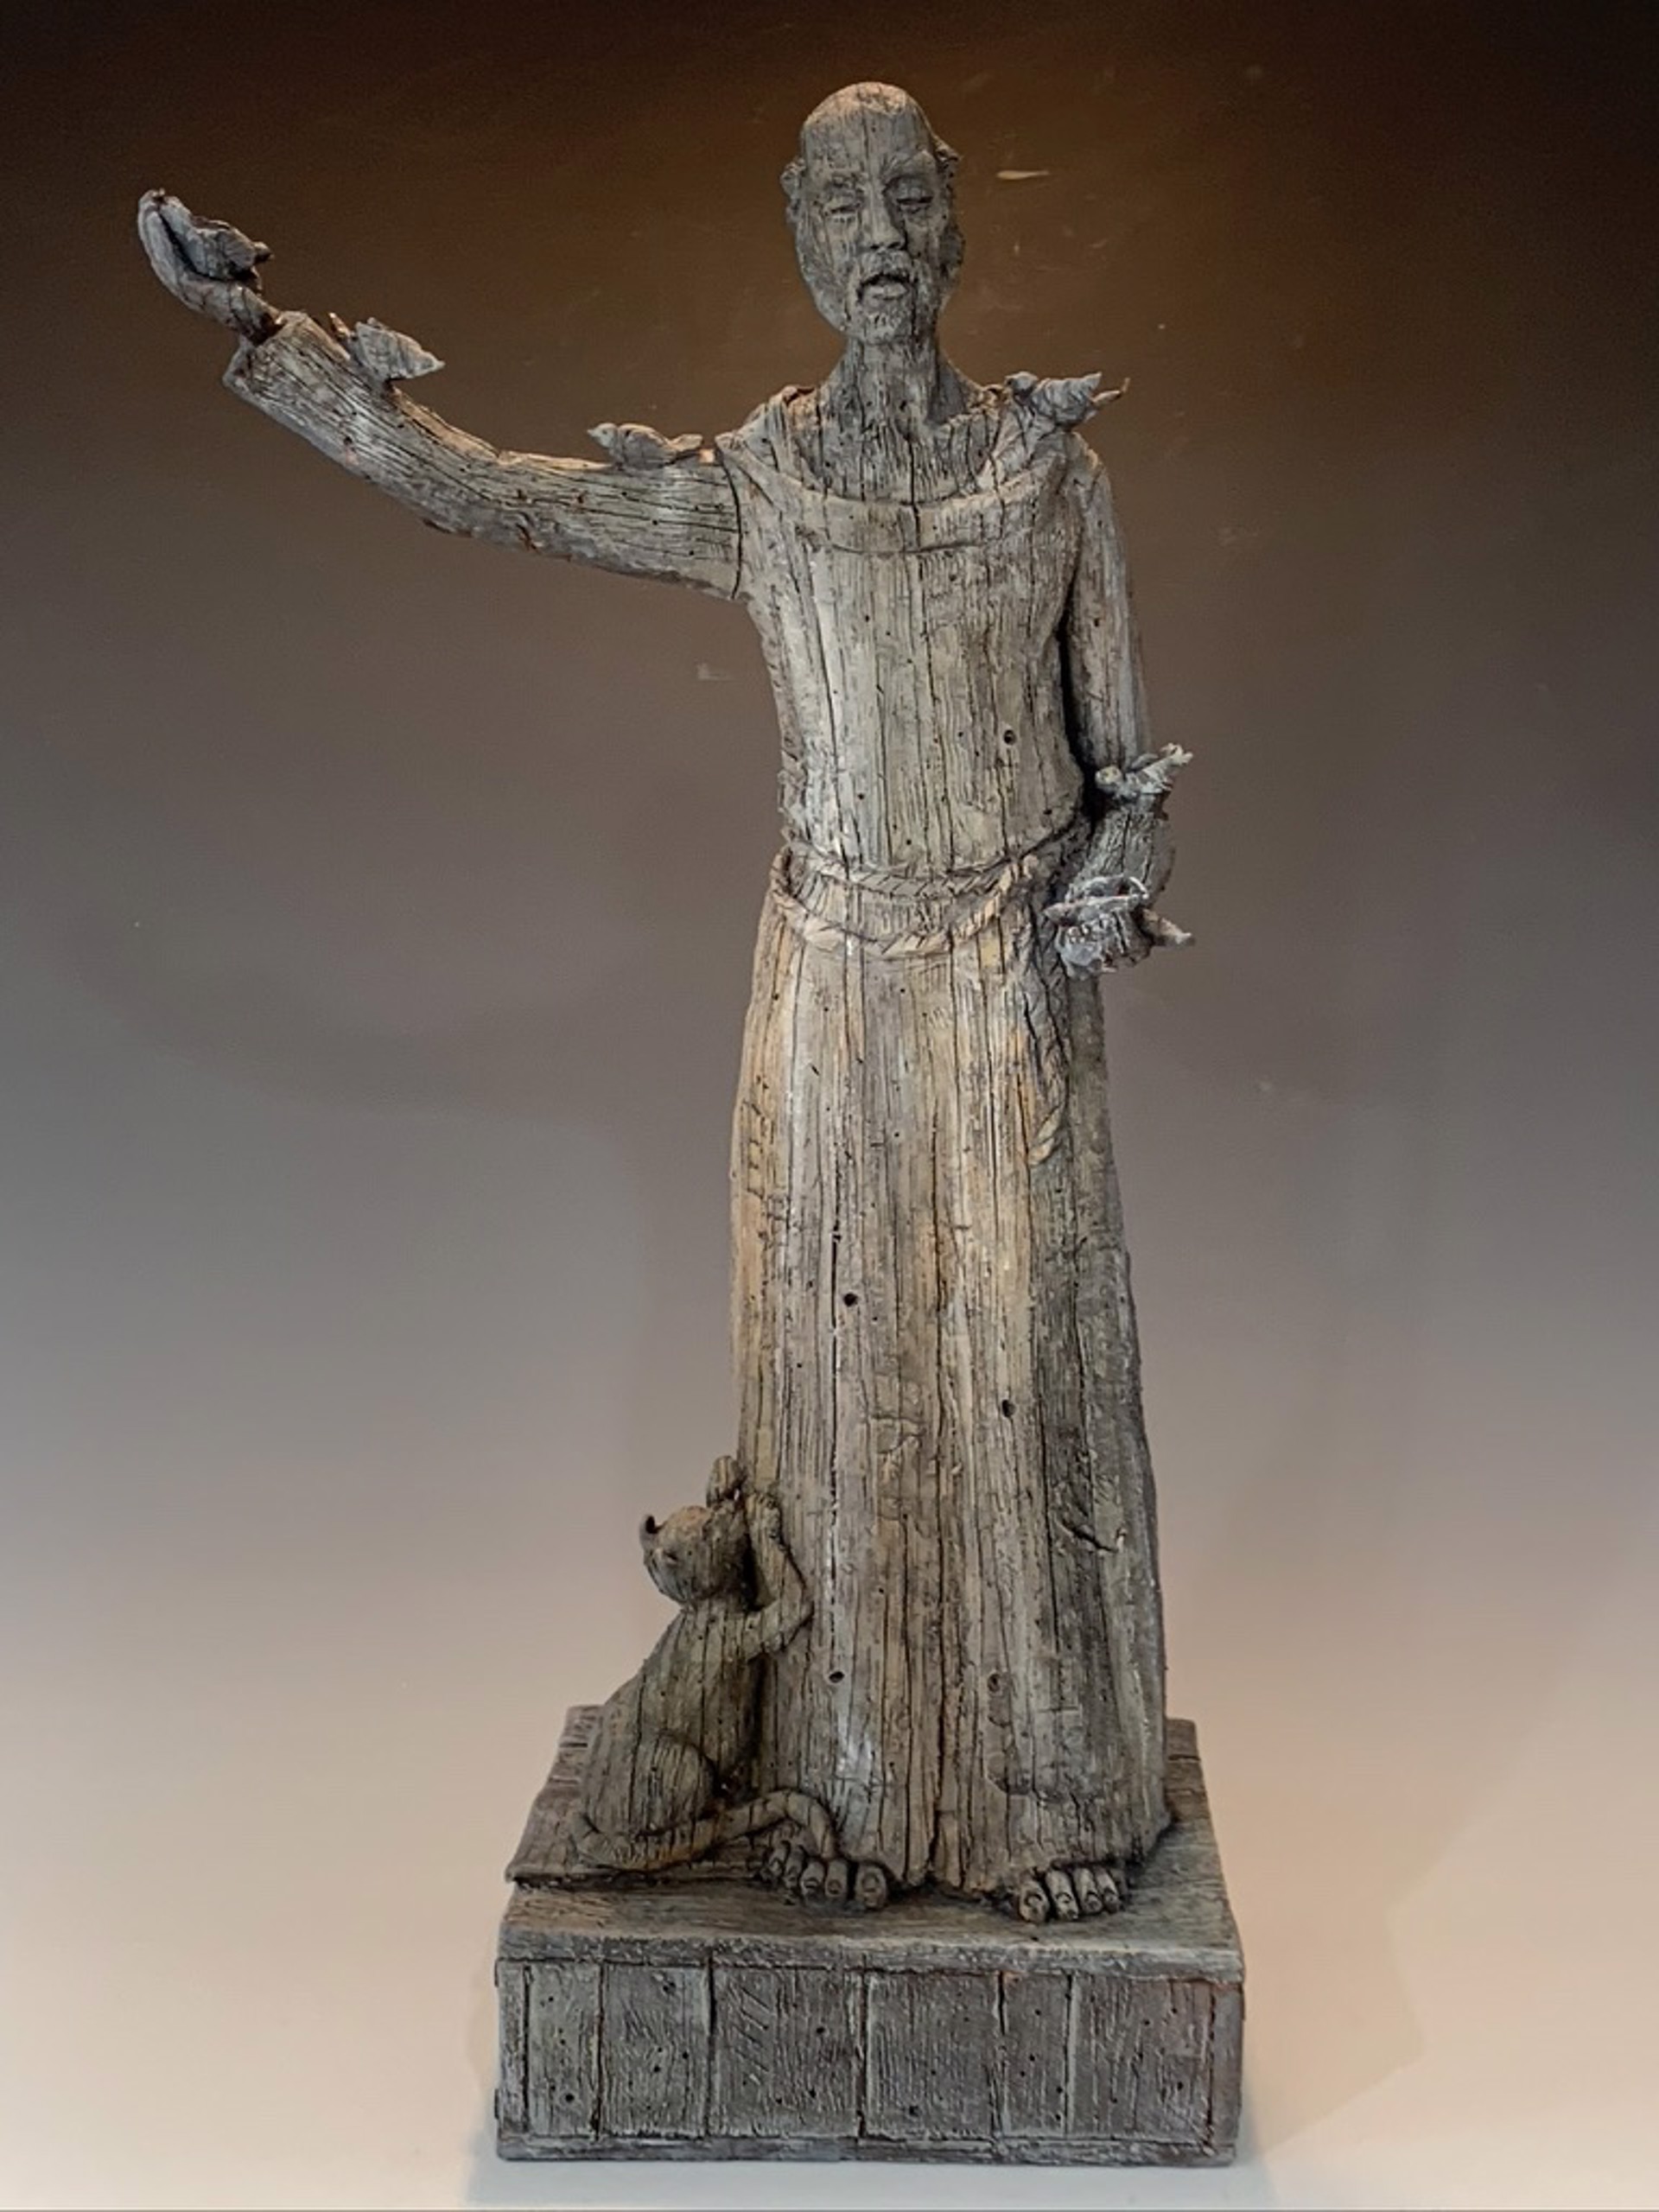 The Cat of St Francis by Pat Magers